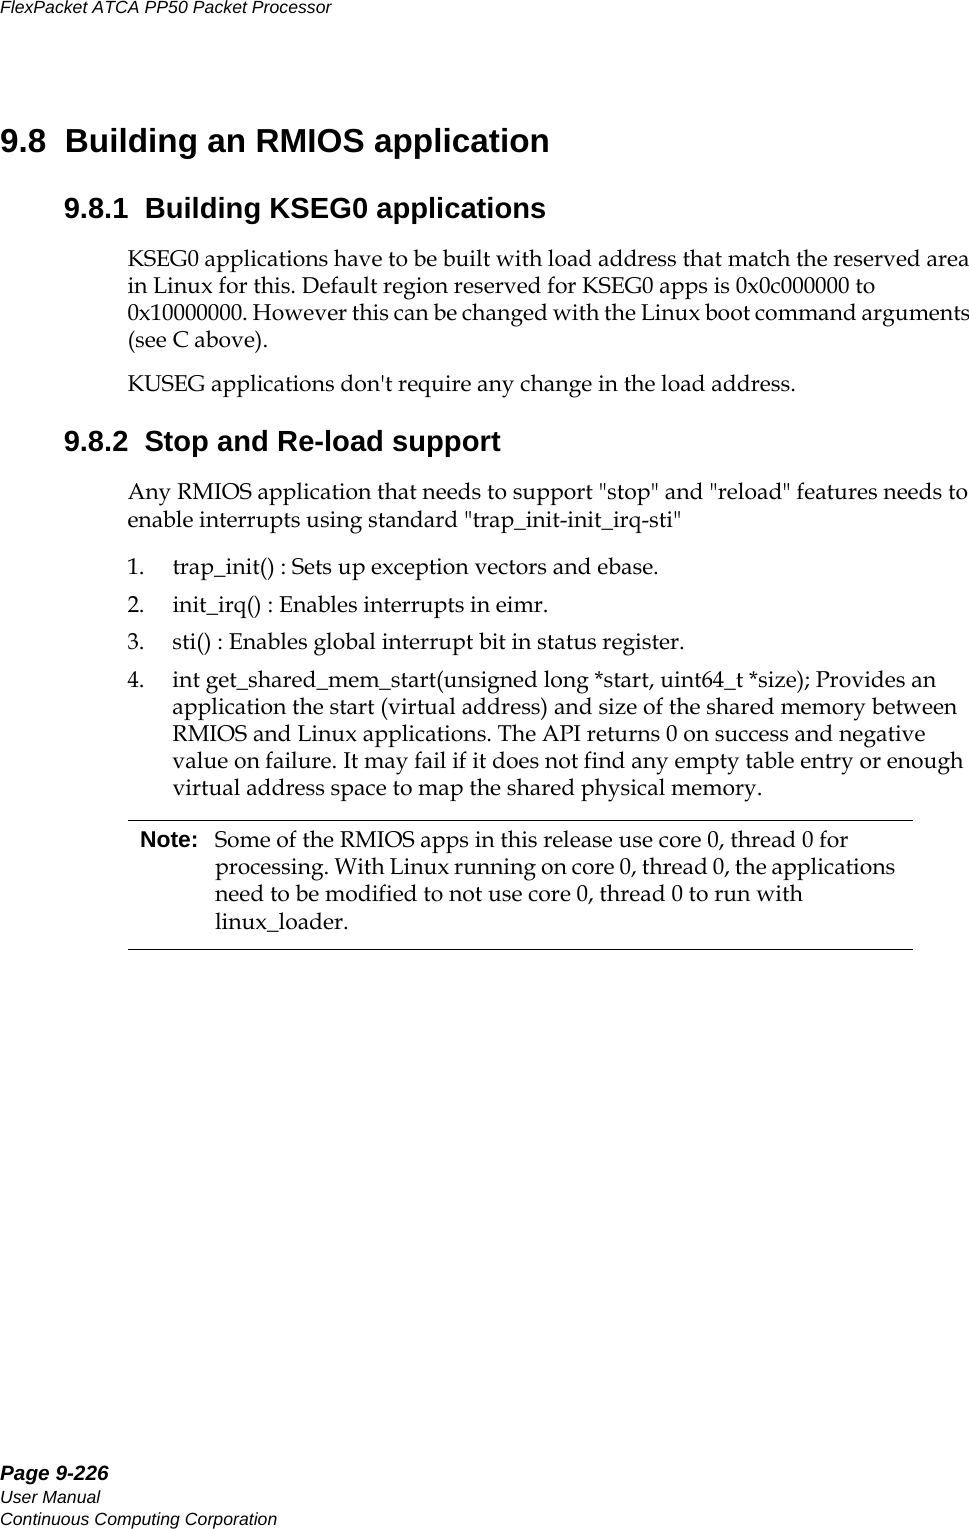 Page 9-226User ManualContinuous Computing CorporationFlexPacket ATCA PP50 Packet Processor     Preliminary9.8  Building an RMIOS application9.8.1  Building KSEG0 applicationsKSEG0 applications have to be built with load address that match the reserved area in Linux for this. Default region reserved for KSEG0 apps is 0x0c000000 to 0x10000000. However this can be changed with the Linux boot command arguments (see C above).KUSEG applications don&apos;t require any change in the load address.9.8.2  Stop and Re-load supportAny RMIOS application that needs to support &quot;stop&quot; and &quot;reload&quot; features needs to enable interrupts using standard &quot;trap_init-init_irq-sti&quot;1. trap_init() : Sets up exception vectors and ebase.2. init_irq() : Enables interrupts in eimr.3. sti() : Enables global interrupt bit in status register.4. int get_shared_mem_start(unsigned long *start, uint64_t *size); Provides an application the start (virtual address) and size of the shared memory between RMIOS and Linux applications. The API returns 0 on success and negative value on failure. It may fail if it does not find any empty table entry or enough virtual address space to map the shared physical memory.Note: Some of the RMIOS apps in this release use core 0, thread 0 for processing. With Linux running on core 0, thread 0, the applications need to be modified to not use core 0, thread 0 to run with linux_loader.